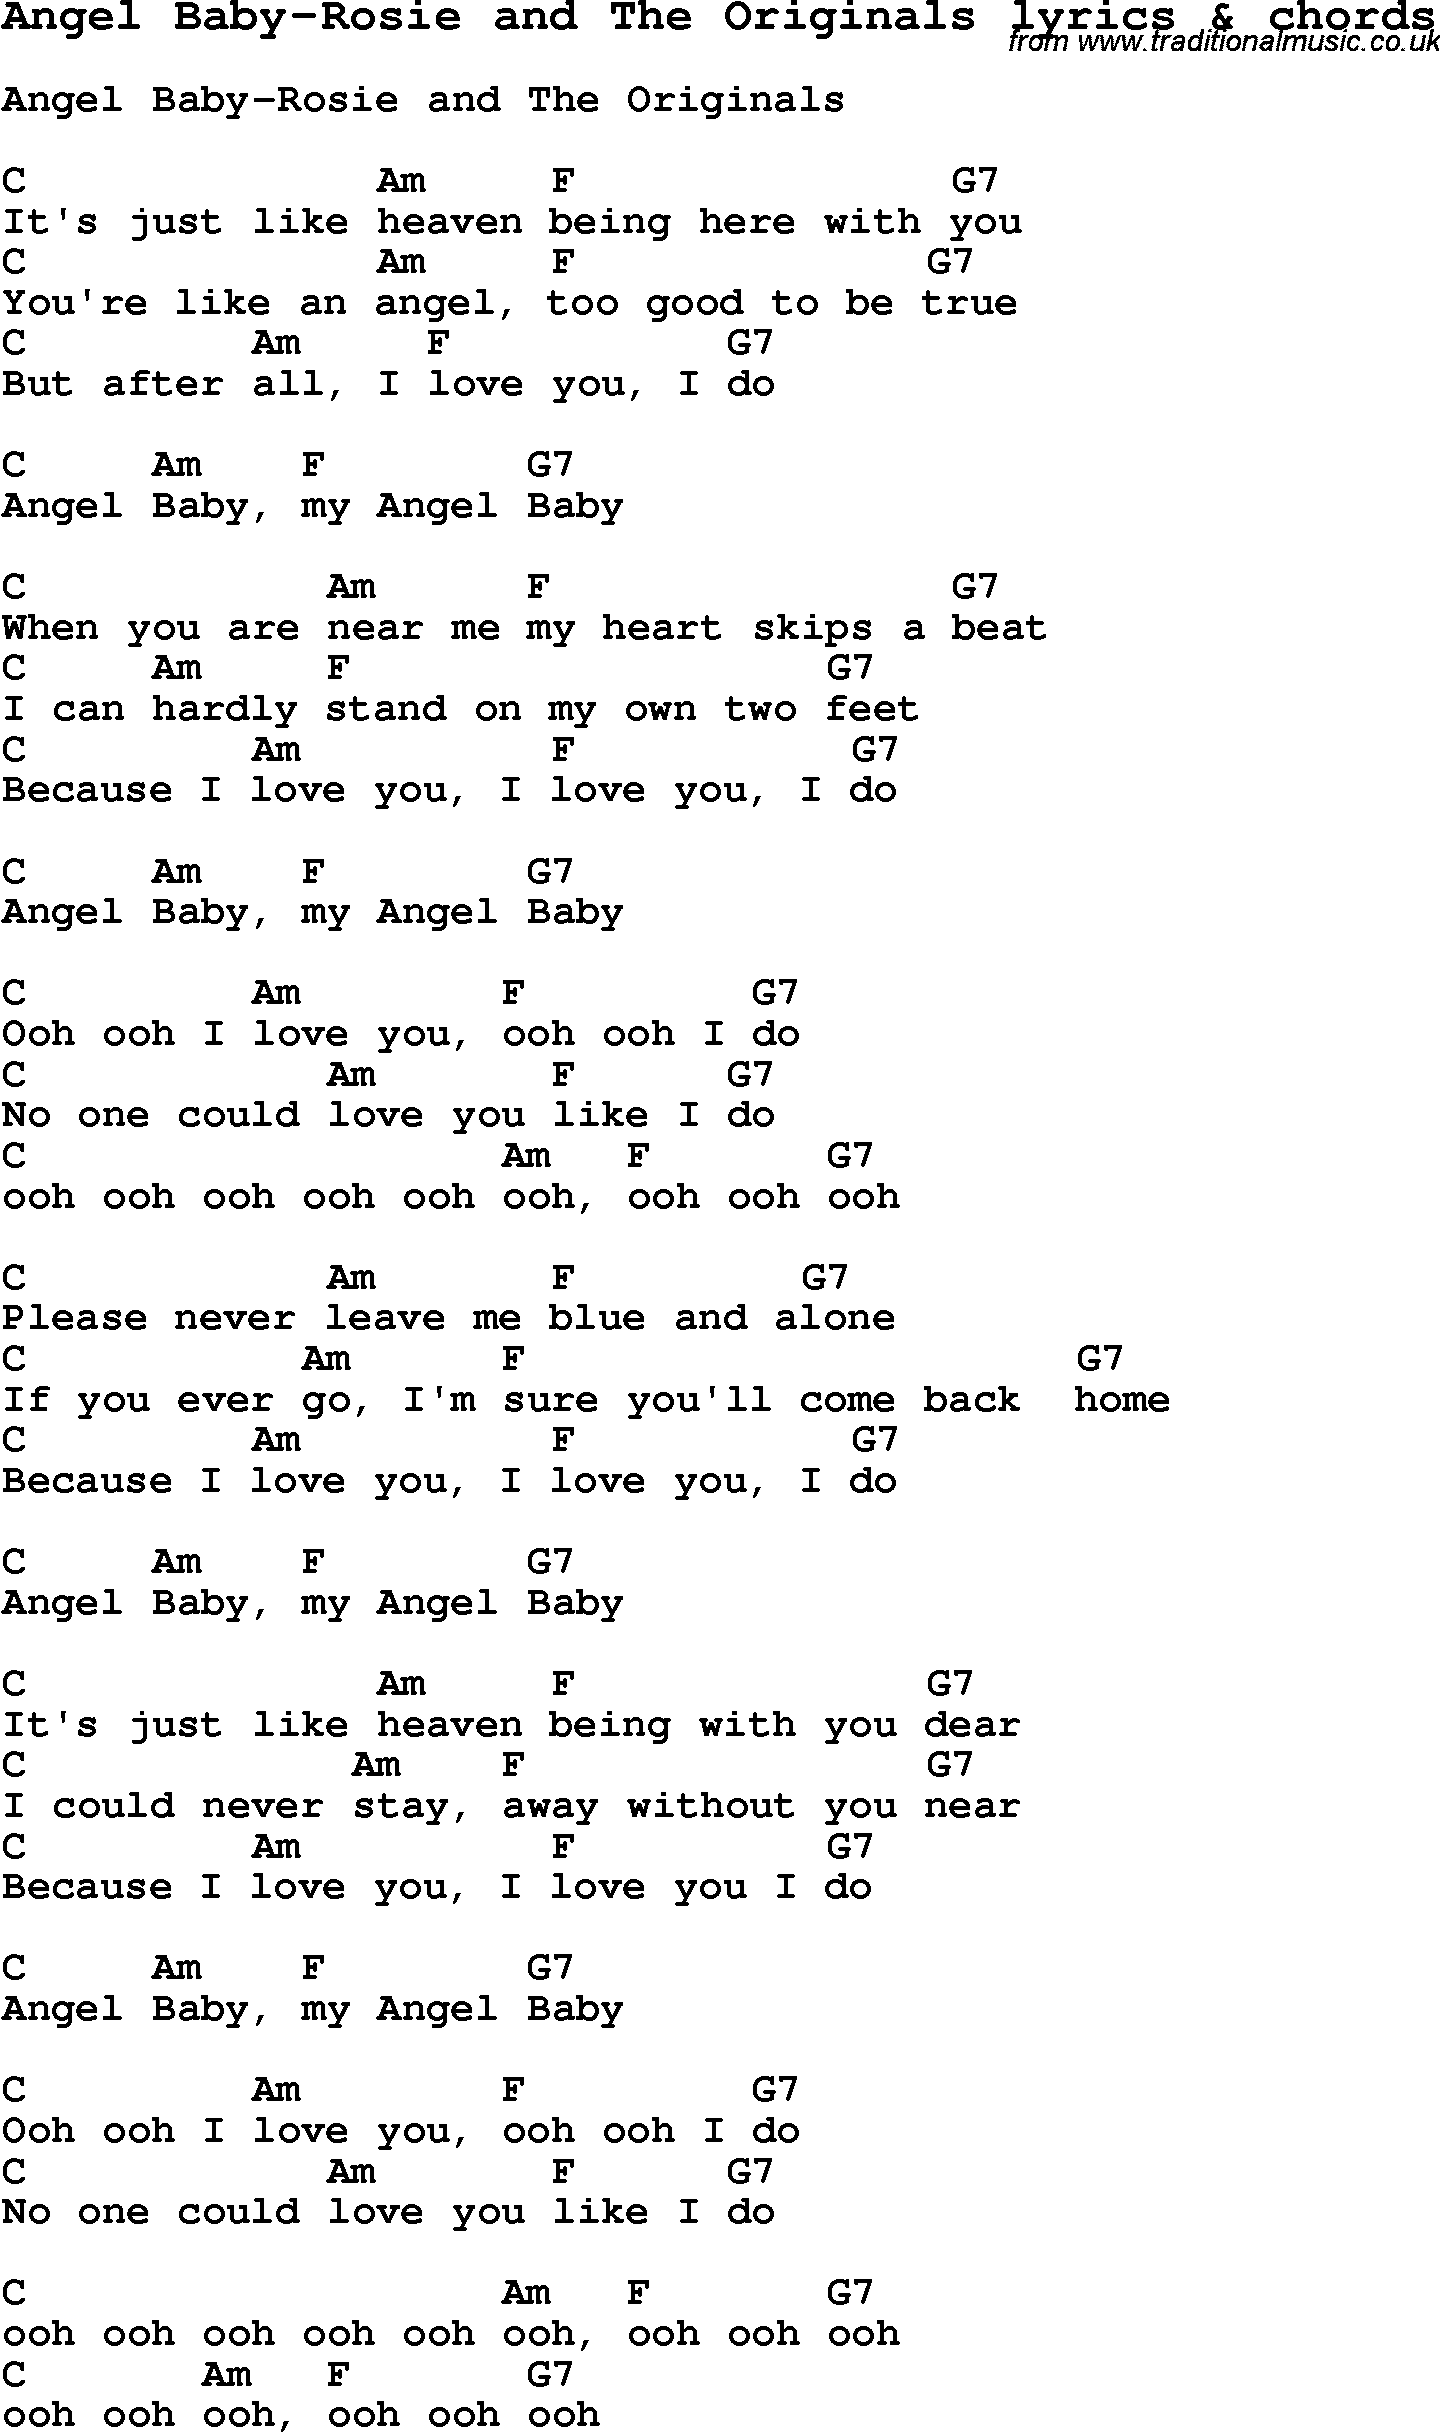 Love Song Lyrics for: Angel Baby-Rosie and The Originals with chords for Ukulele, Guitar Banjo etc.